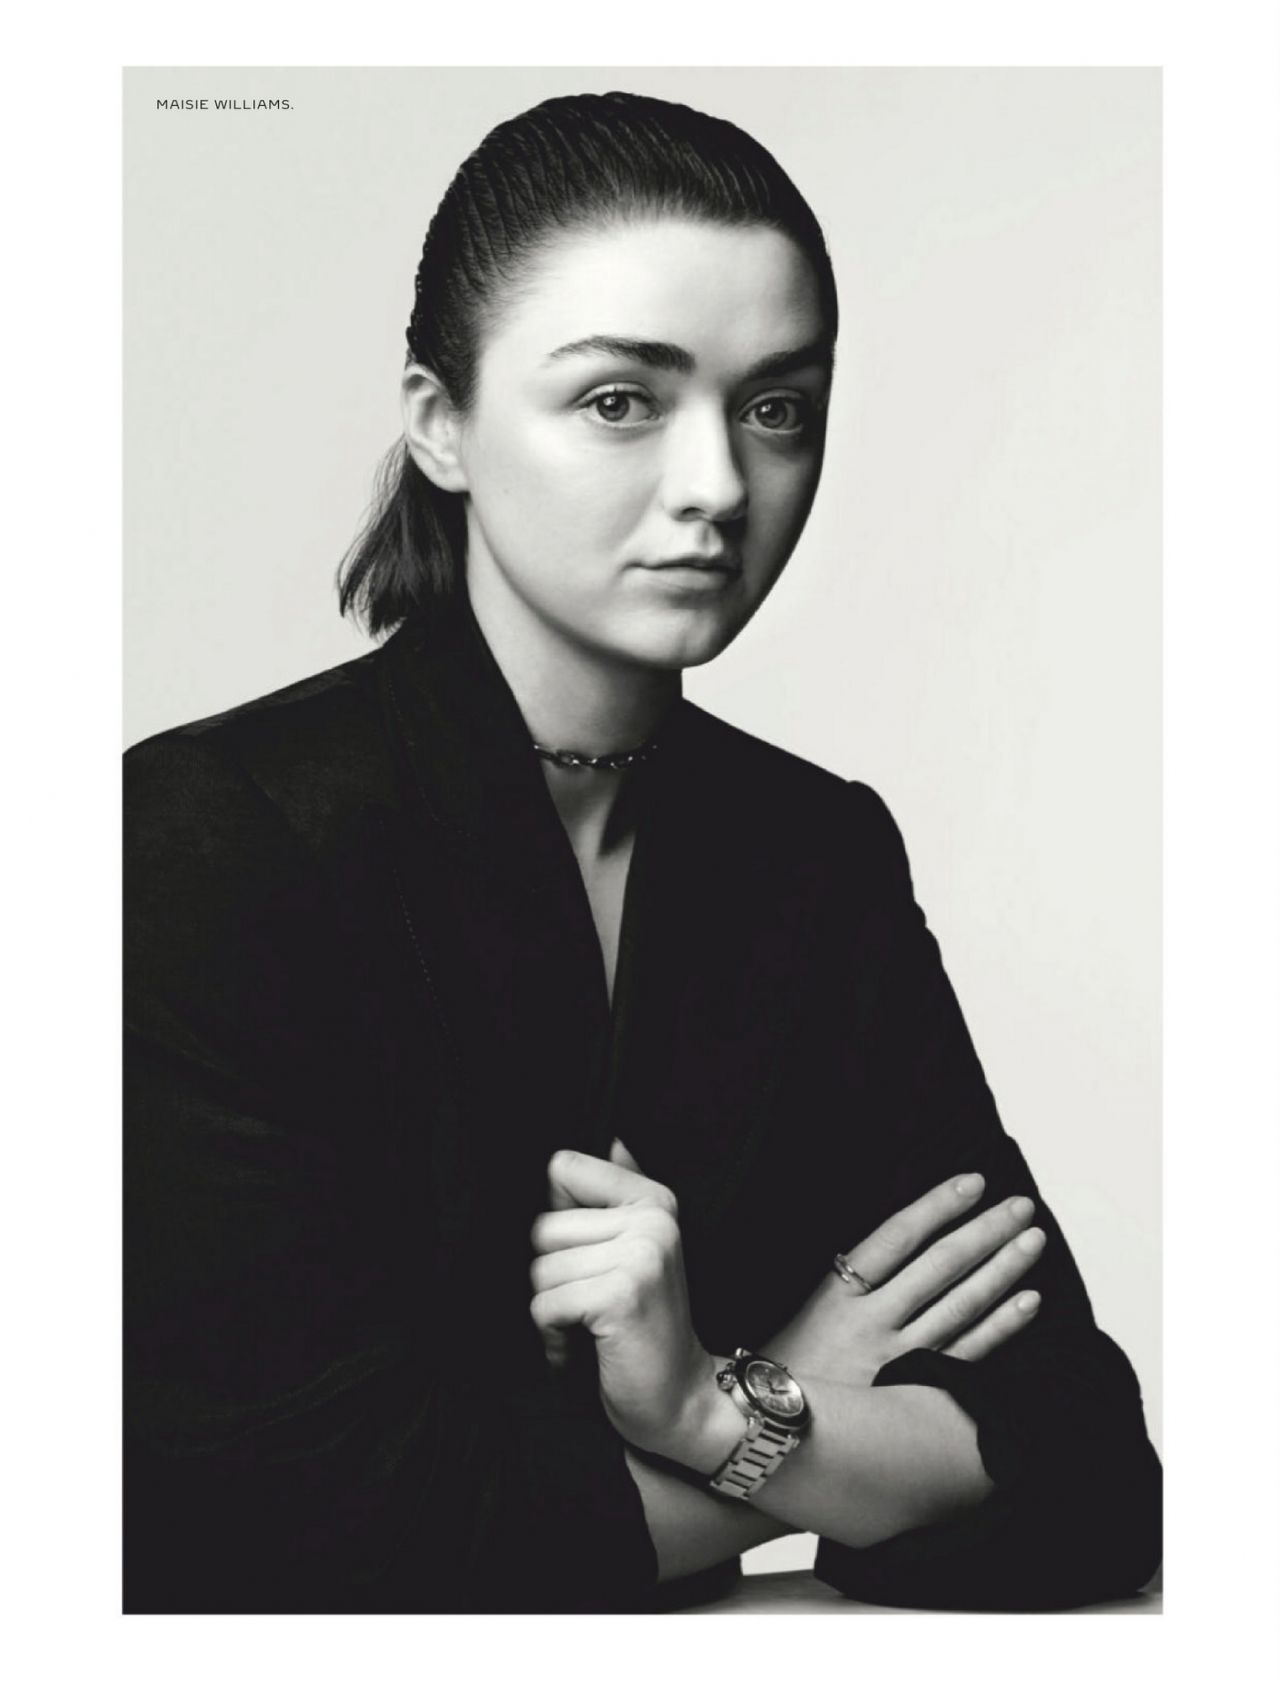 maisie-williams-cartier-promoting-pasha-watch-campaign-2020-4-1.jpg